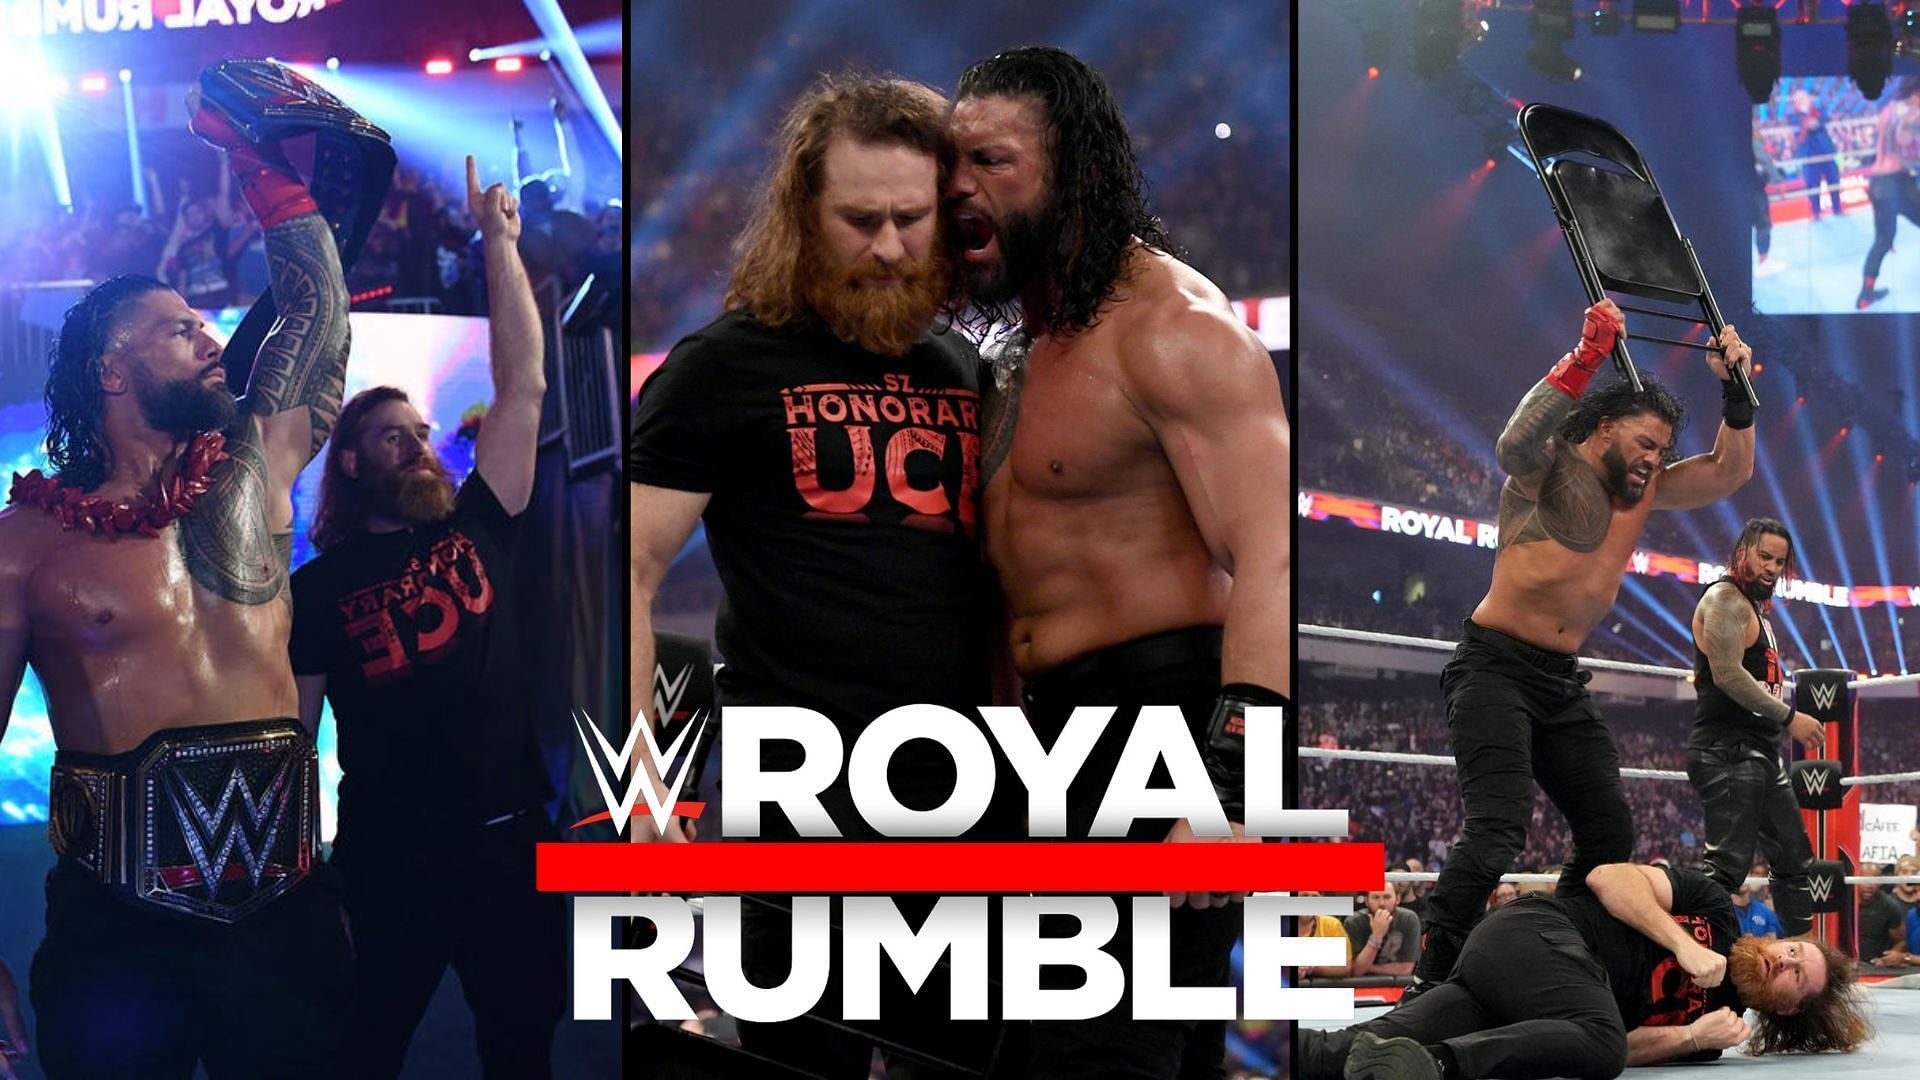 The events that unfolded at WWE Royal Rumble